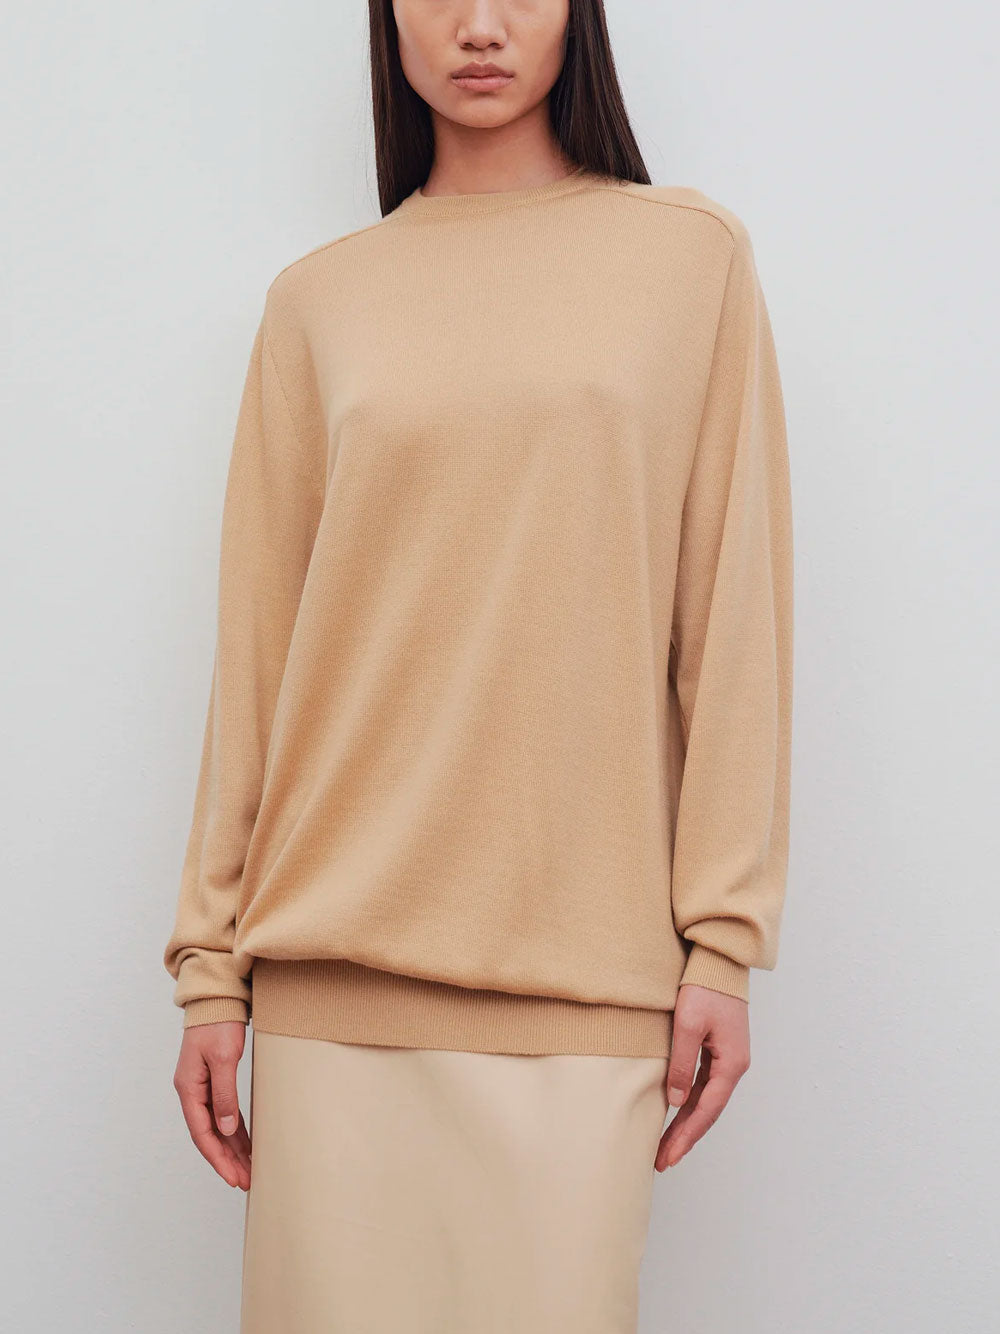 Tana top in cashmere